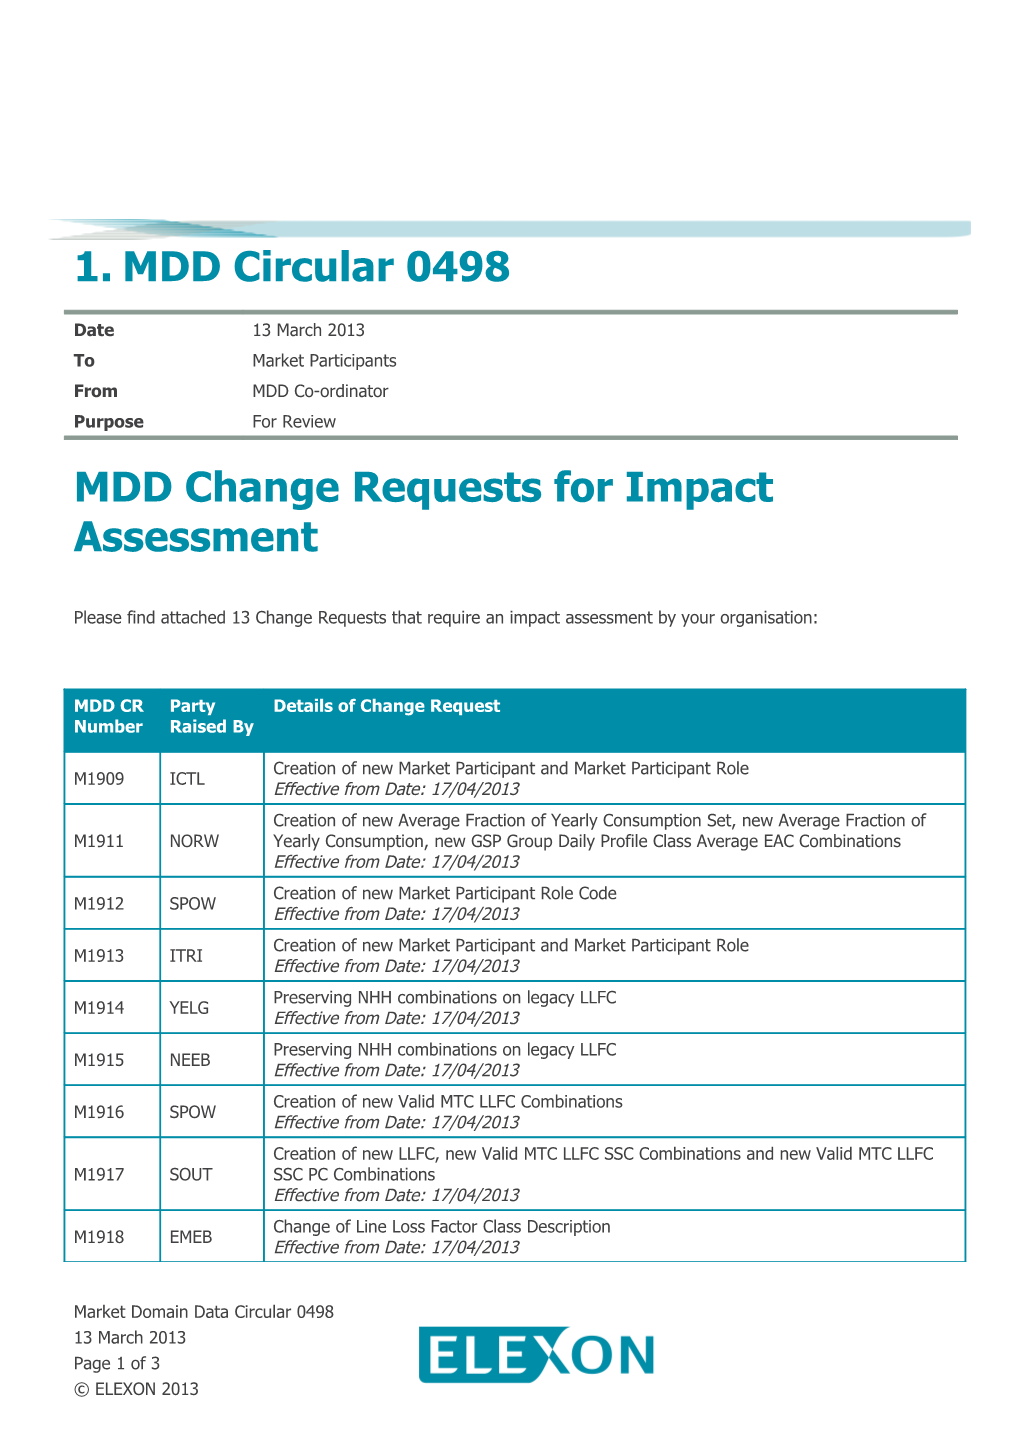 MDD Change Requests for Impact Assessment